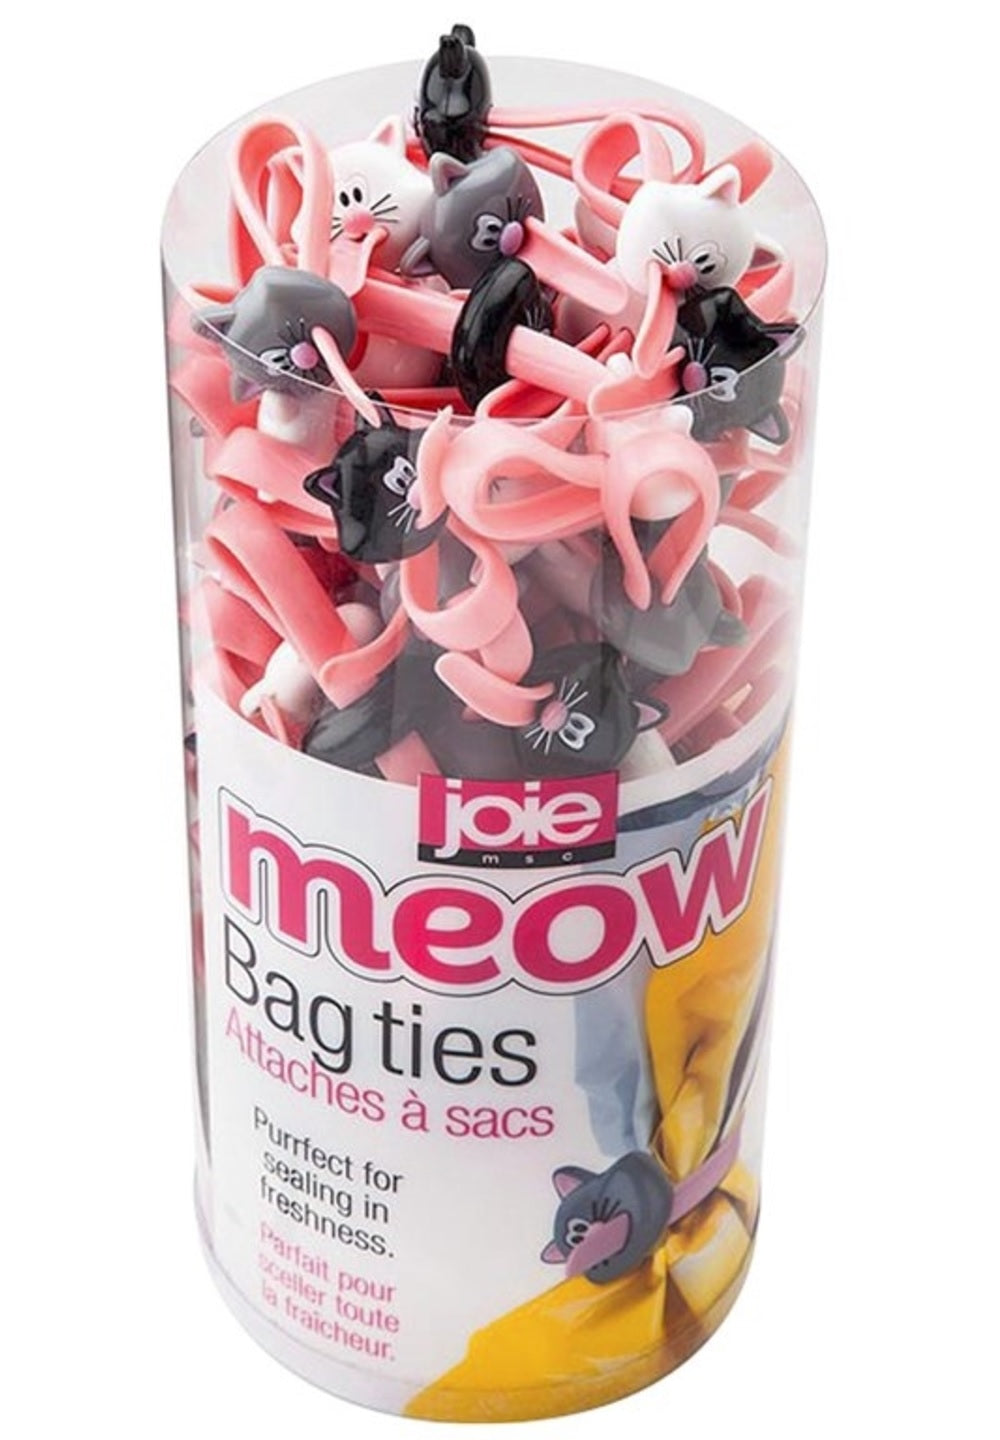 Joie MSC 12850PRO Meow Bag Ties, Assorted Colors